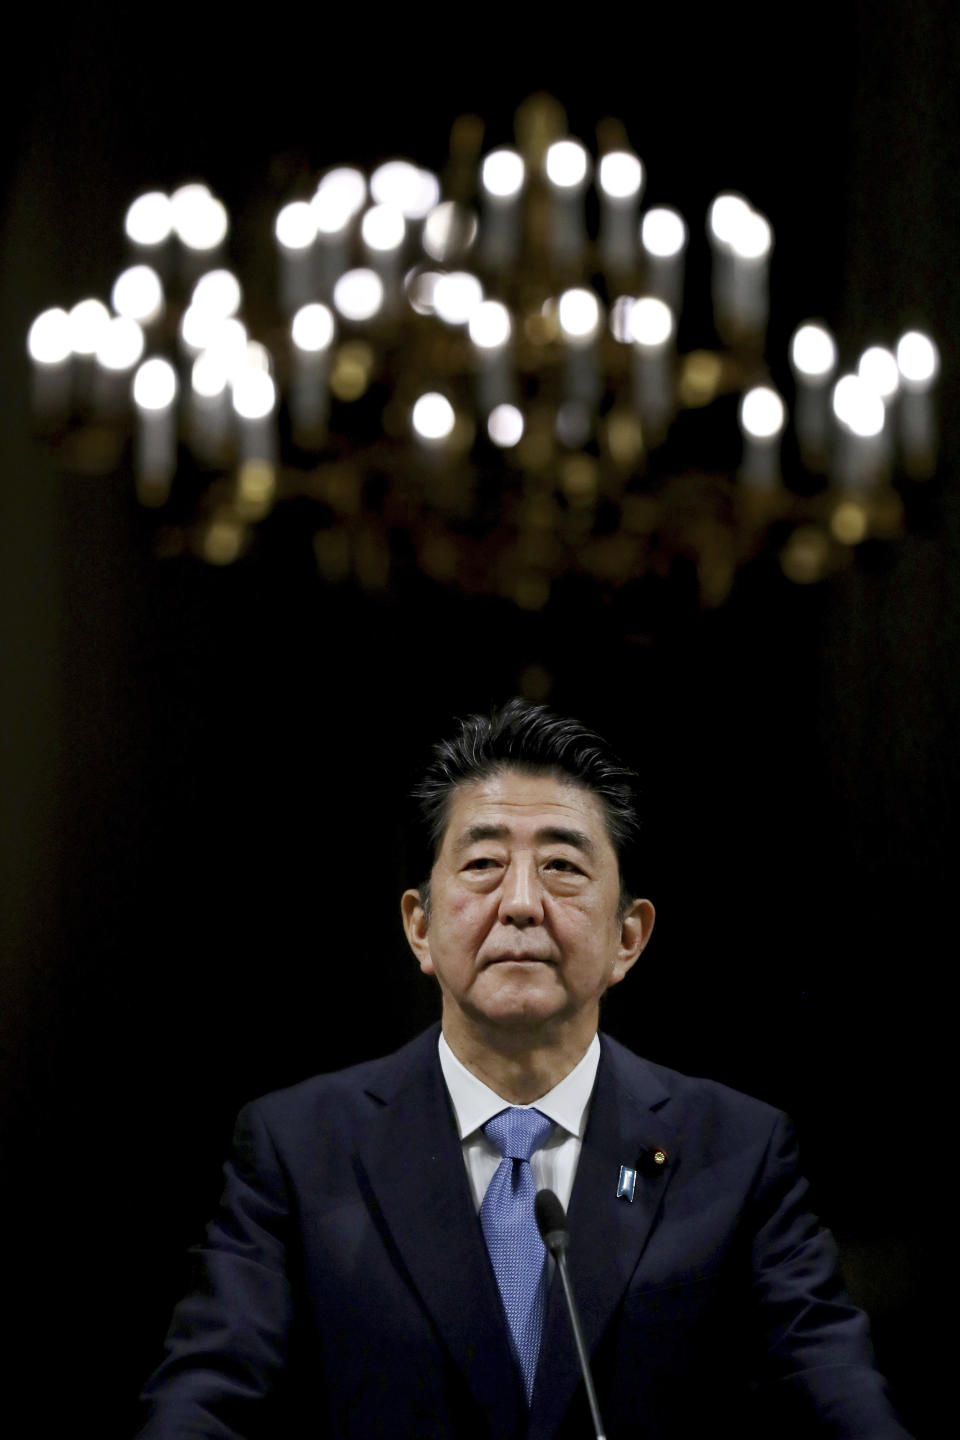 Japanese Prime Minister Shinzo Abe listens during a joint press conference with Iranian President Hassan Rouhani after their meeting at the Saadabad Palace in Tehran, Iran, Wednesday, June 12, 2019. The Japanese leader is in Tehran on an mission to calm tensions between the U.S. and Iran. (AP Photo/Ebrahim Noroozi)